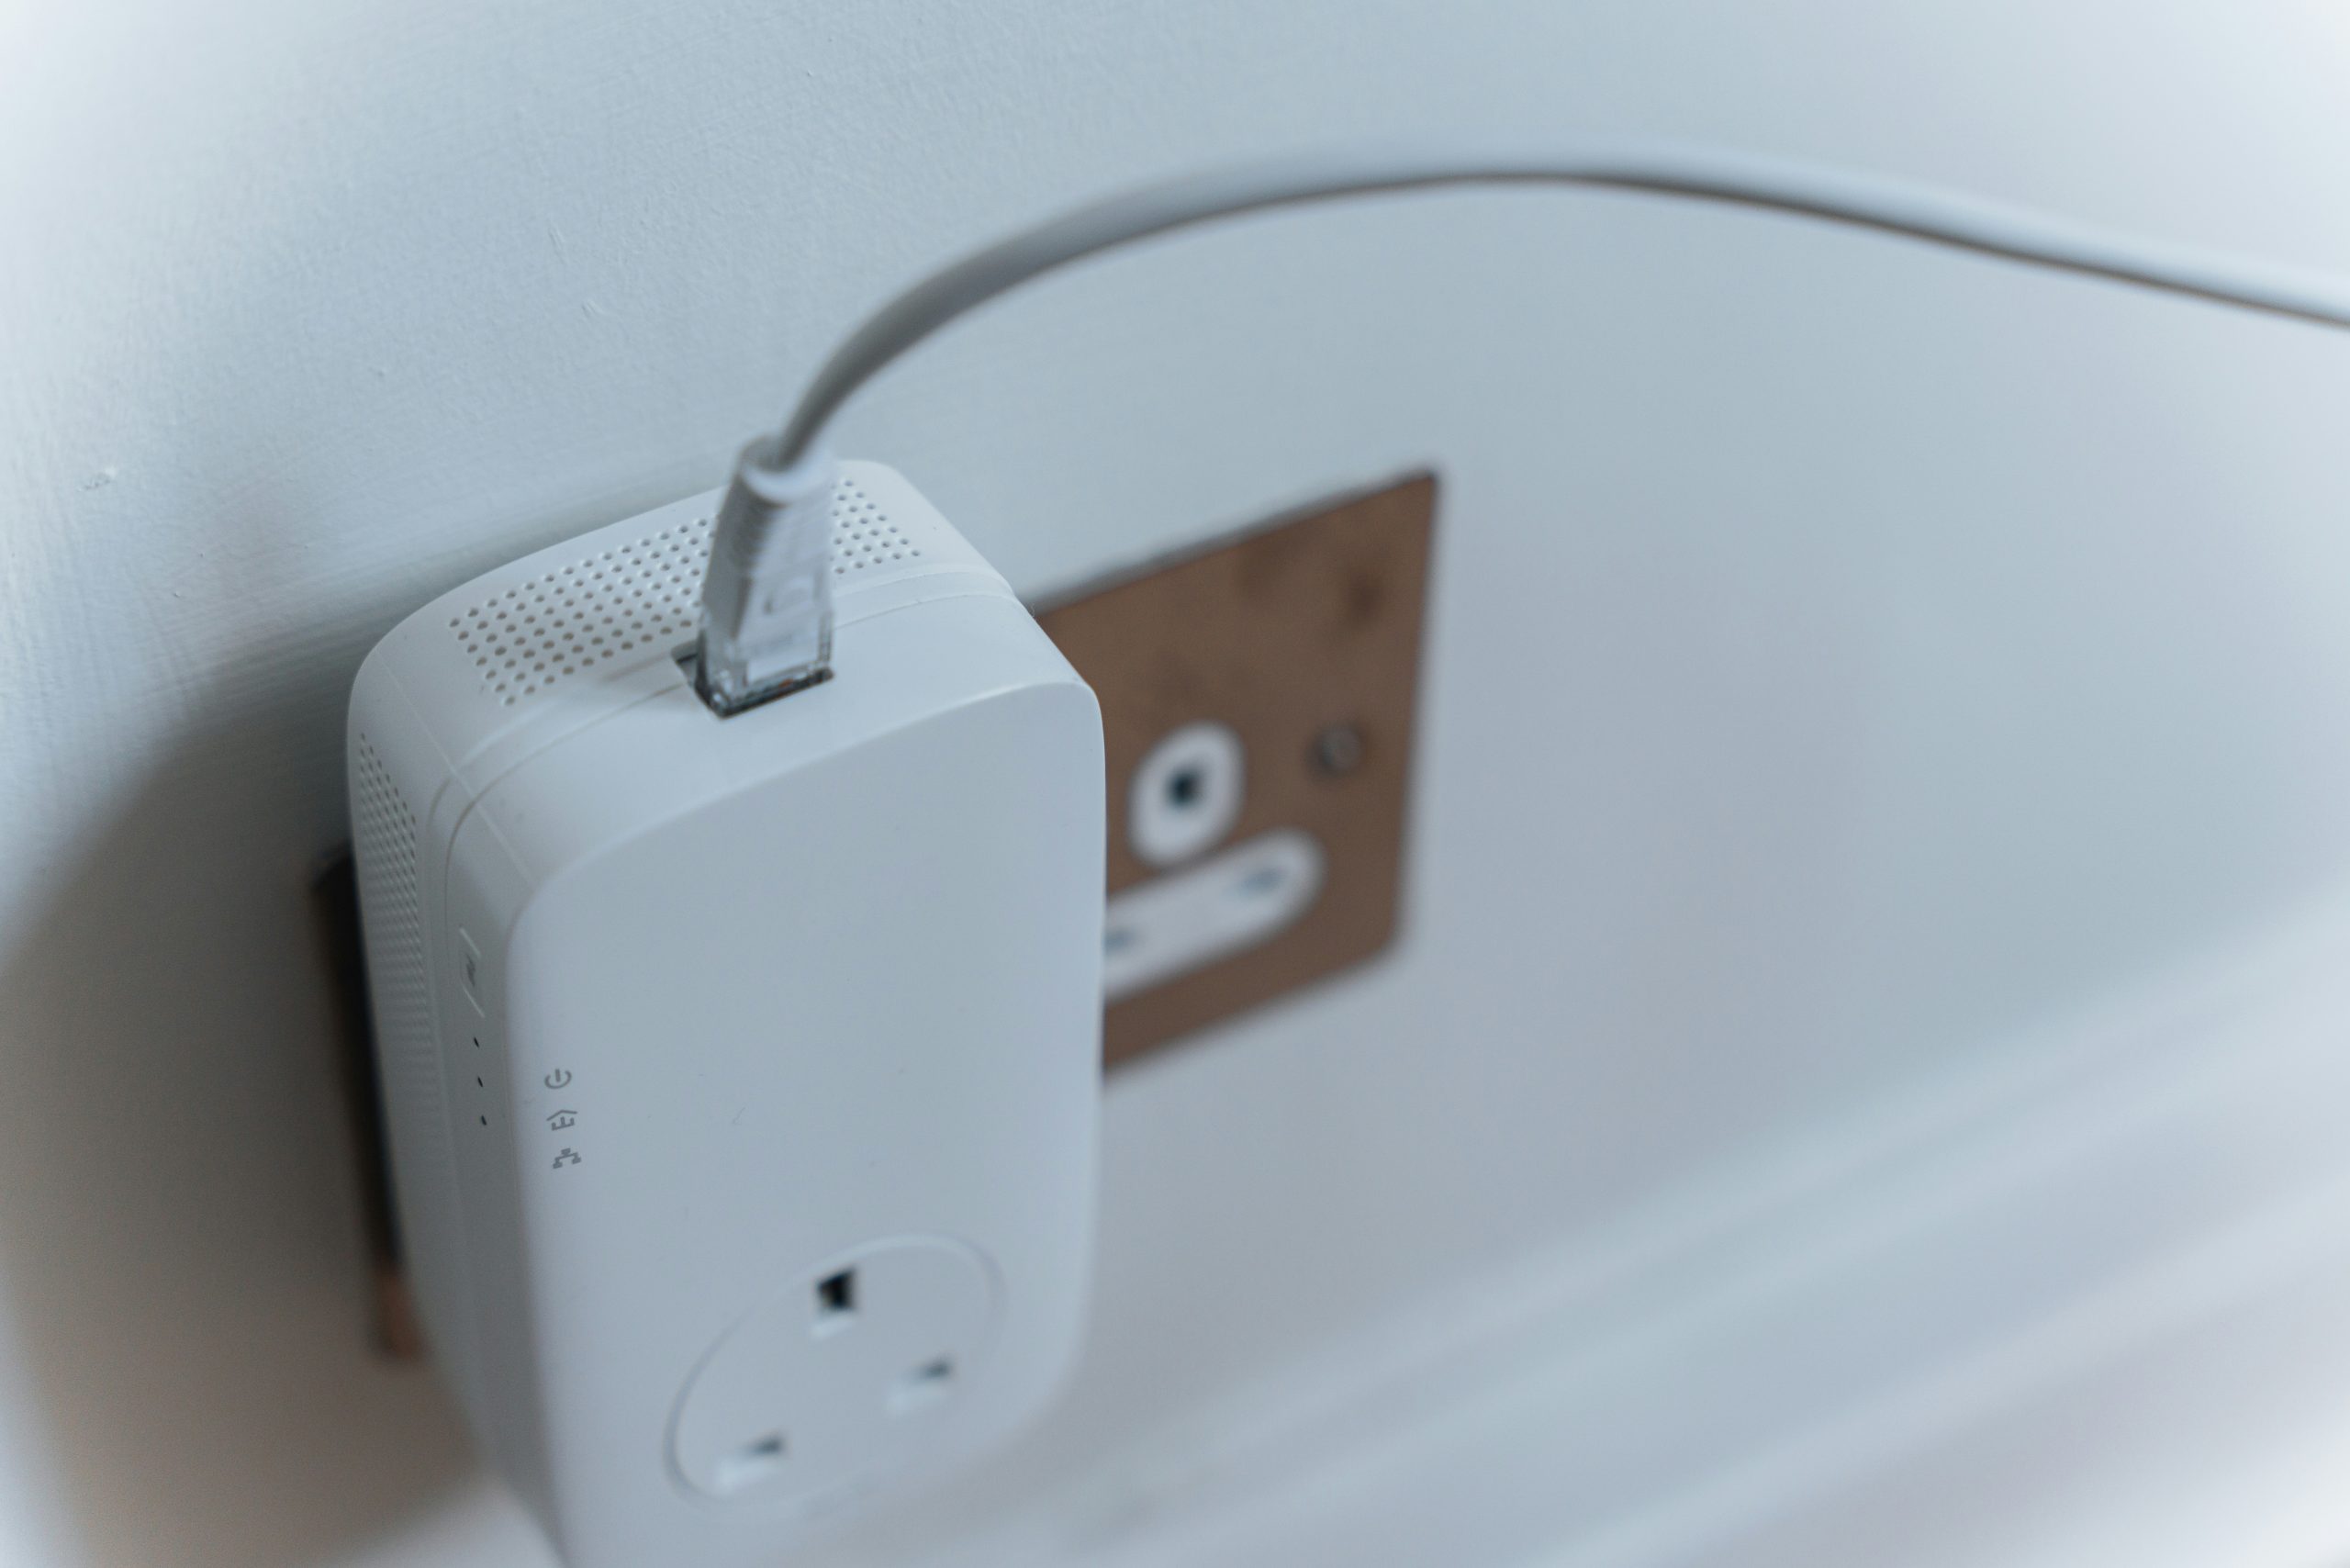 White device plugged into electric outlet